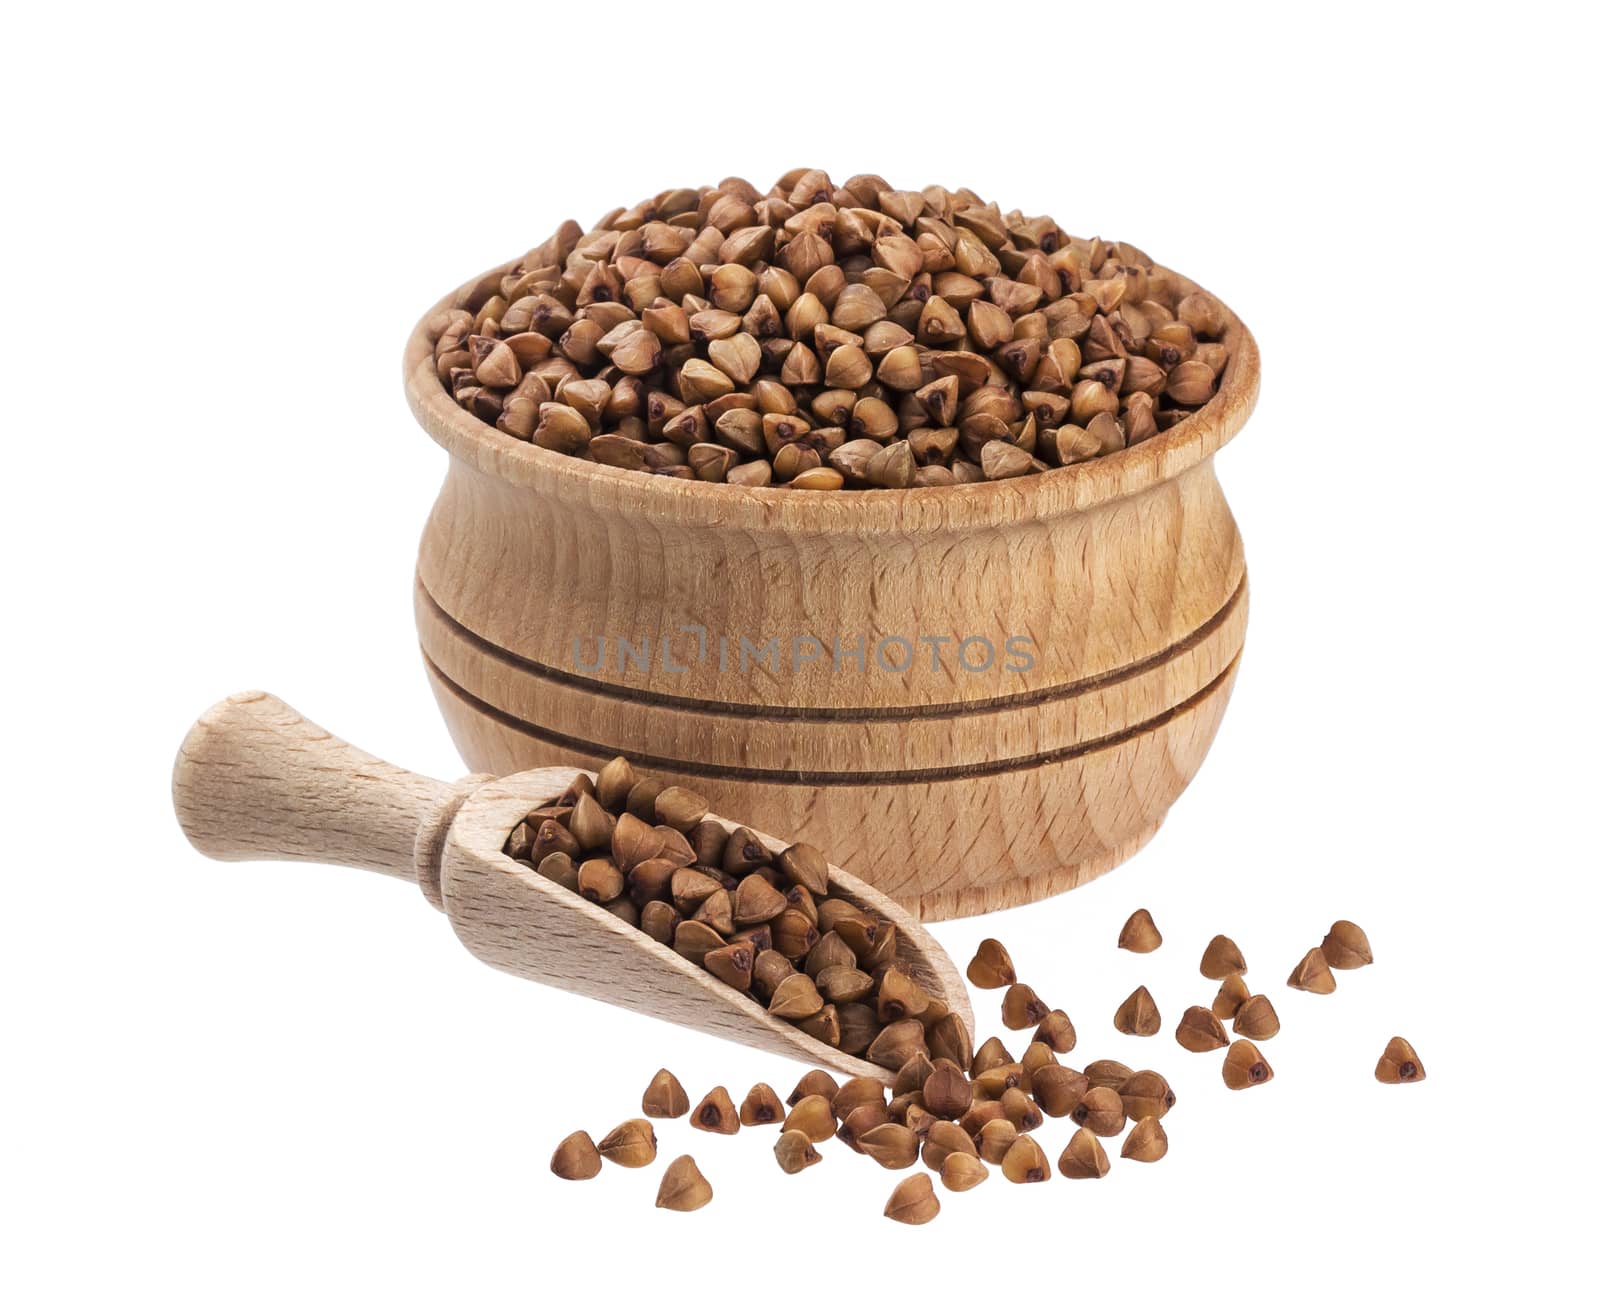 Buckwheat in wooden bowl isolated on white background with clipping path